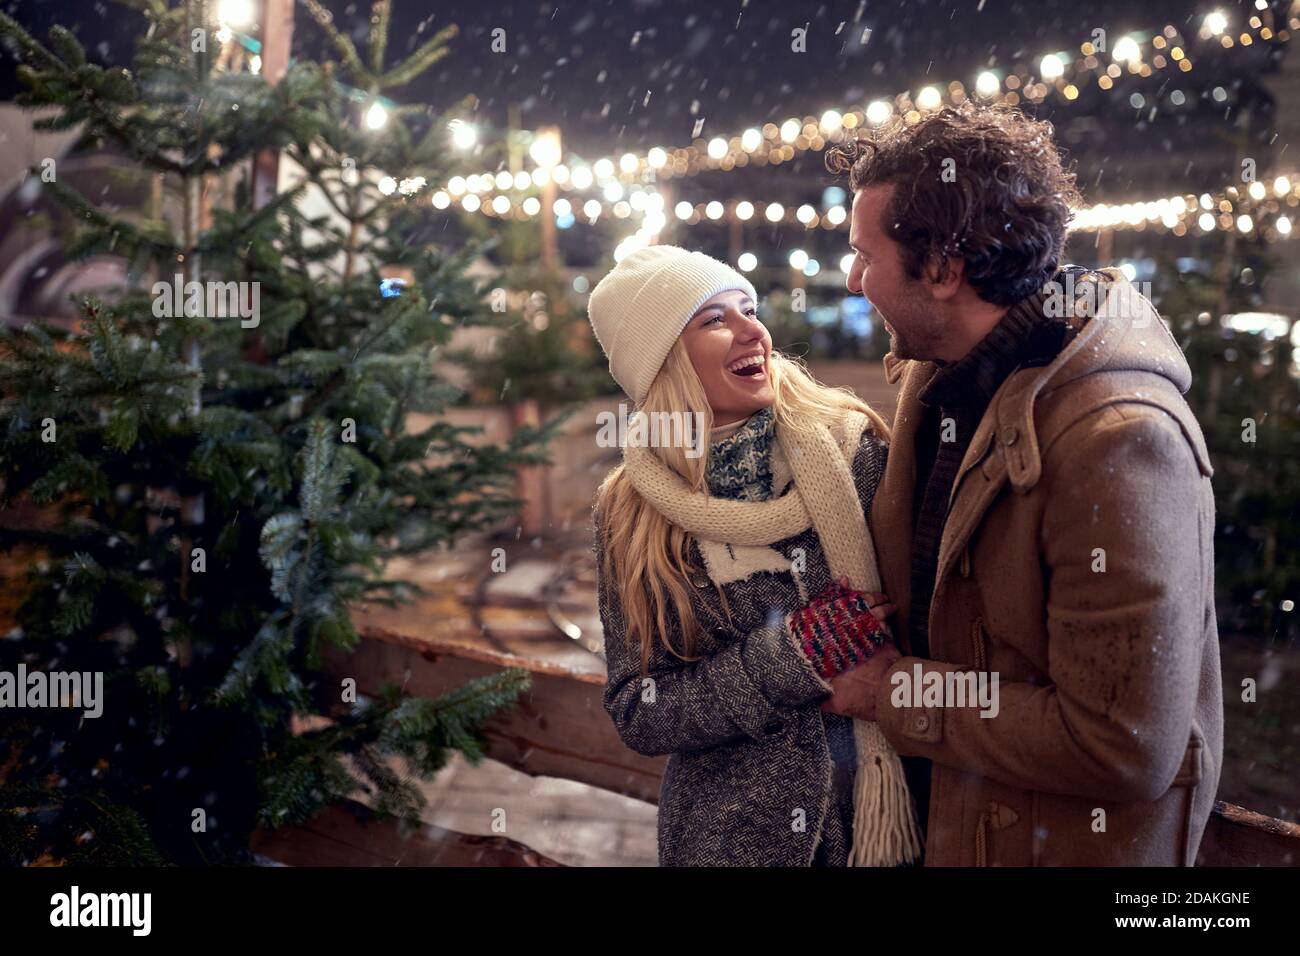 A young happy couple enjoying snowfall in a magical night in the city. Christmas tree, love, relationship, Xmas, snow Stock Photo